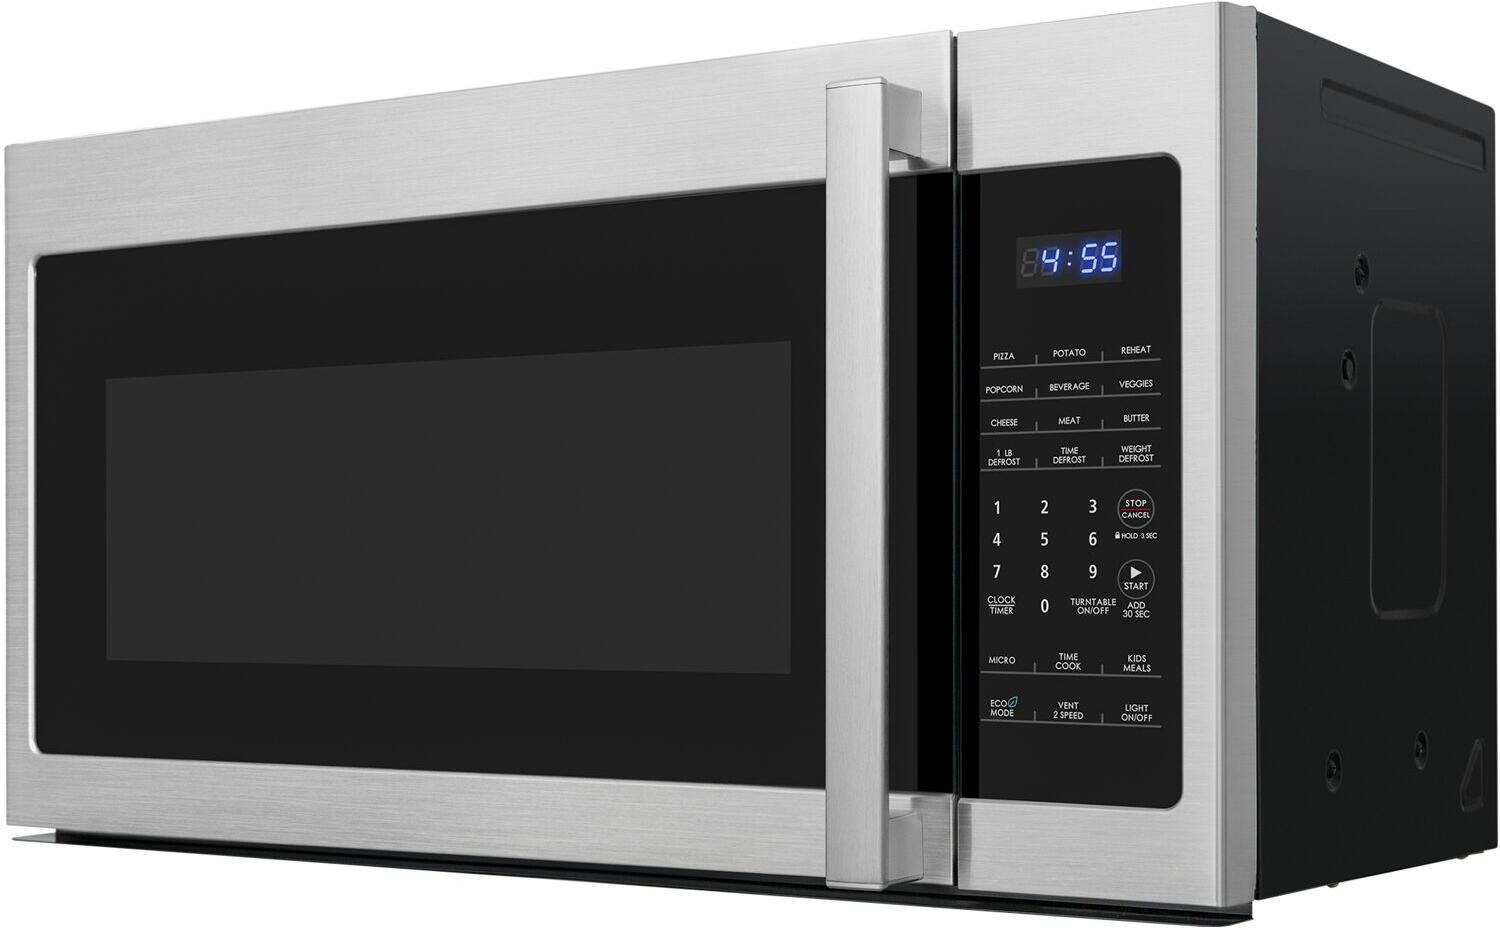 Galanz 30 in. Over-the-Range Microwave in Stainless Steel (GLOMJA17S3B-10)